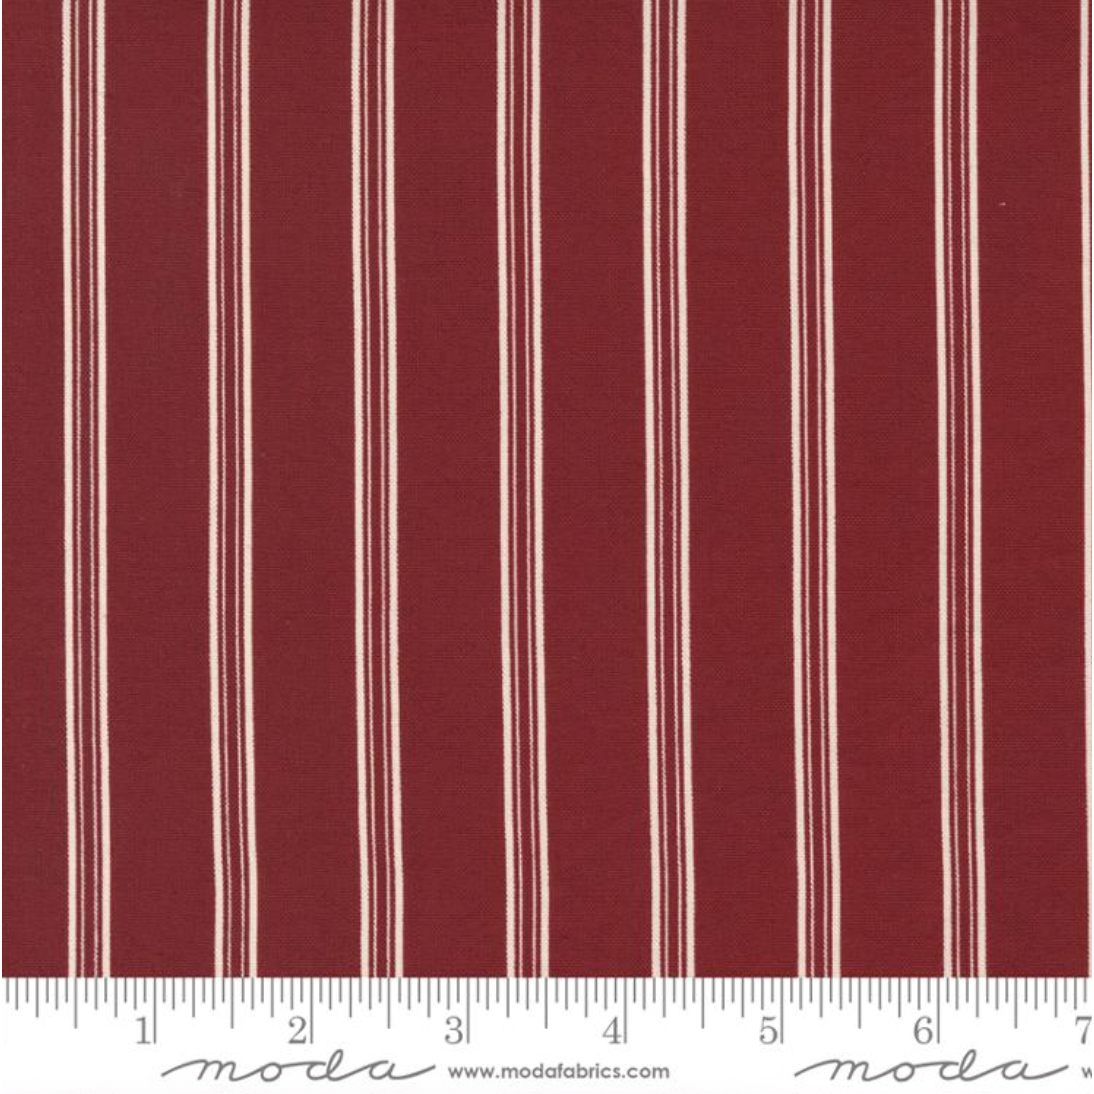 Red and White Gatherings ~ Double Stripe Burgundy 49194 15